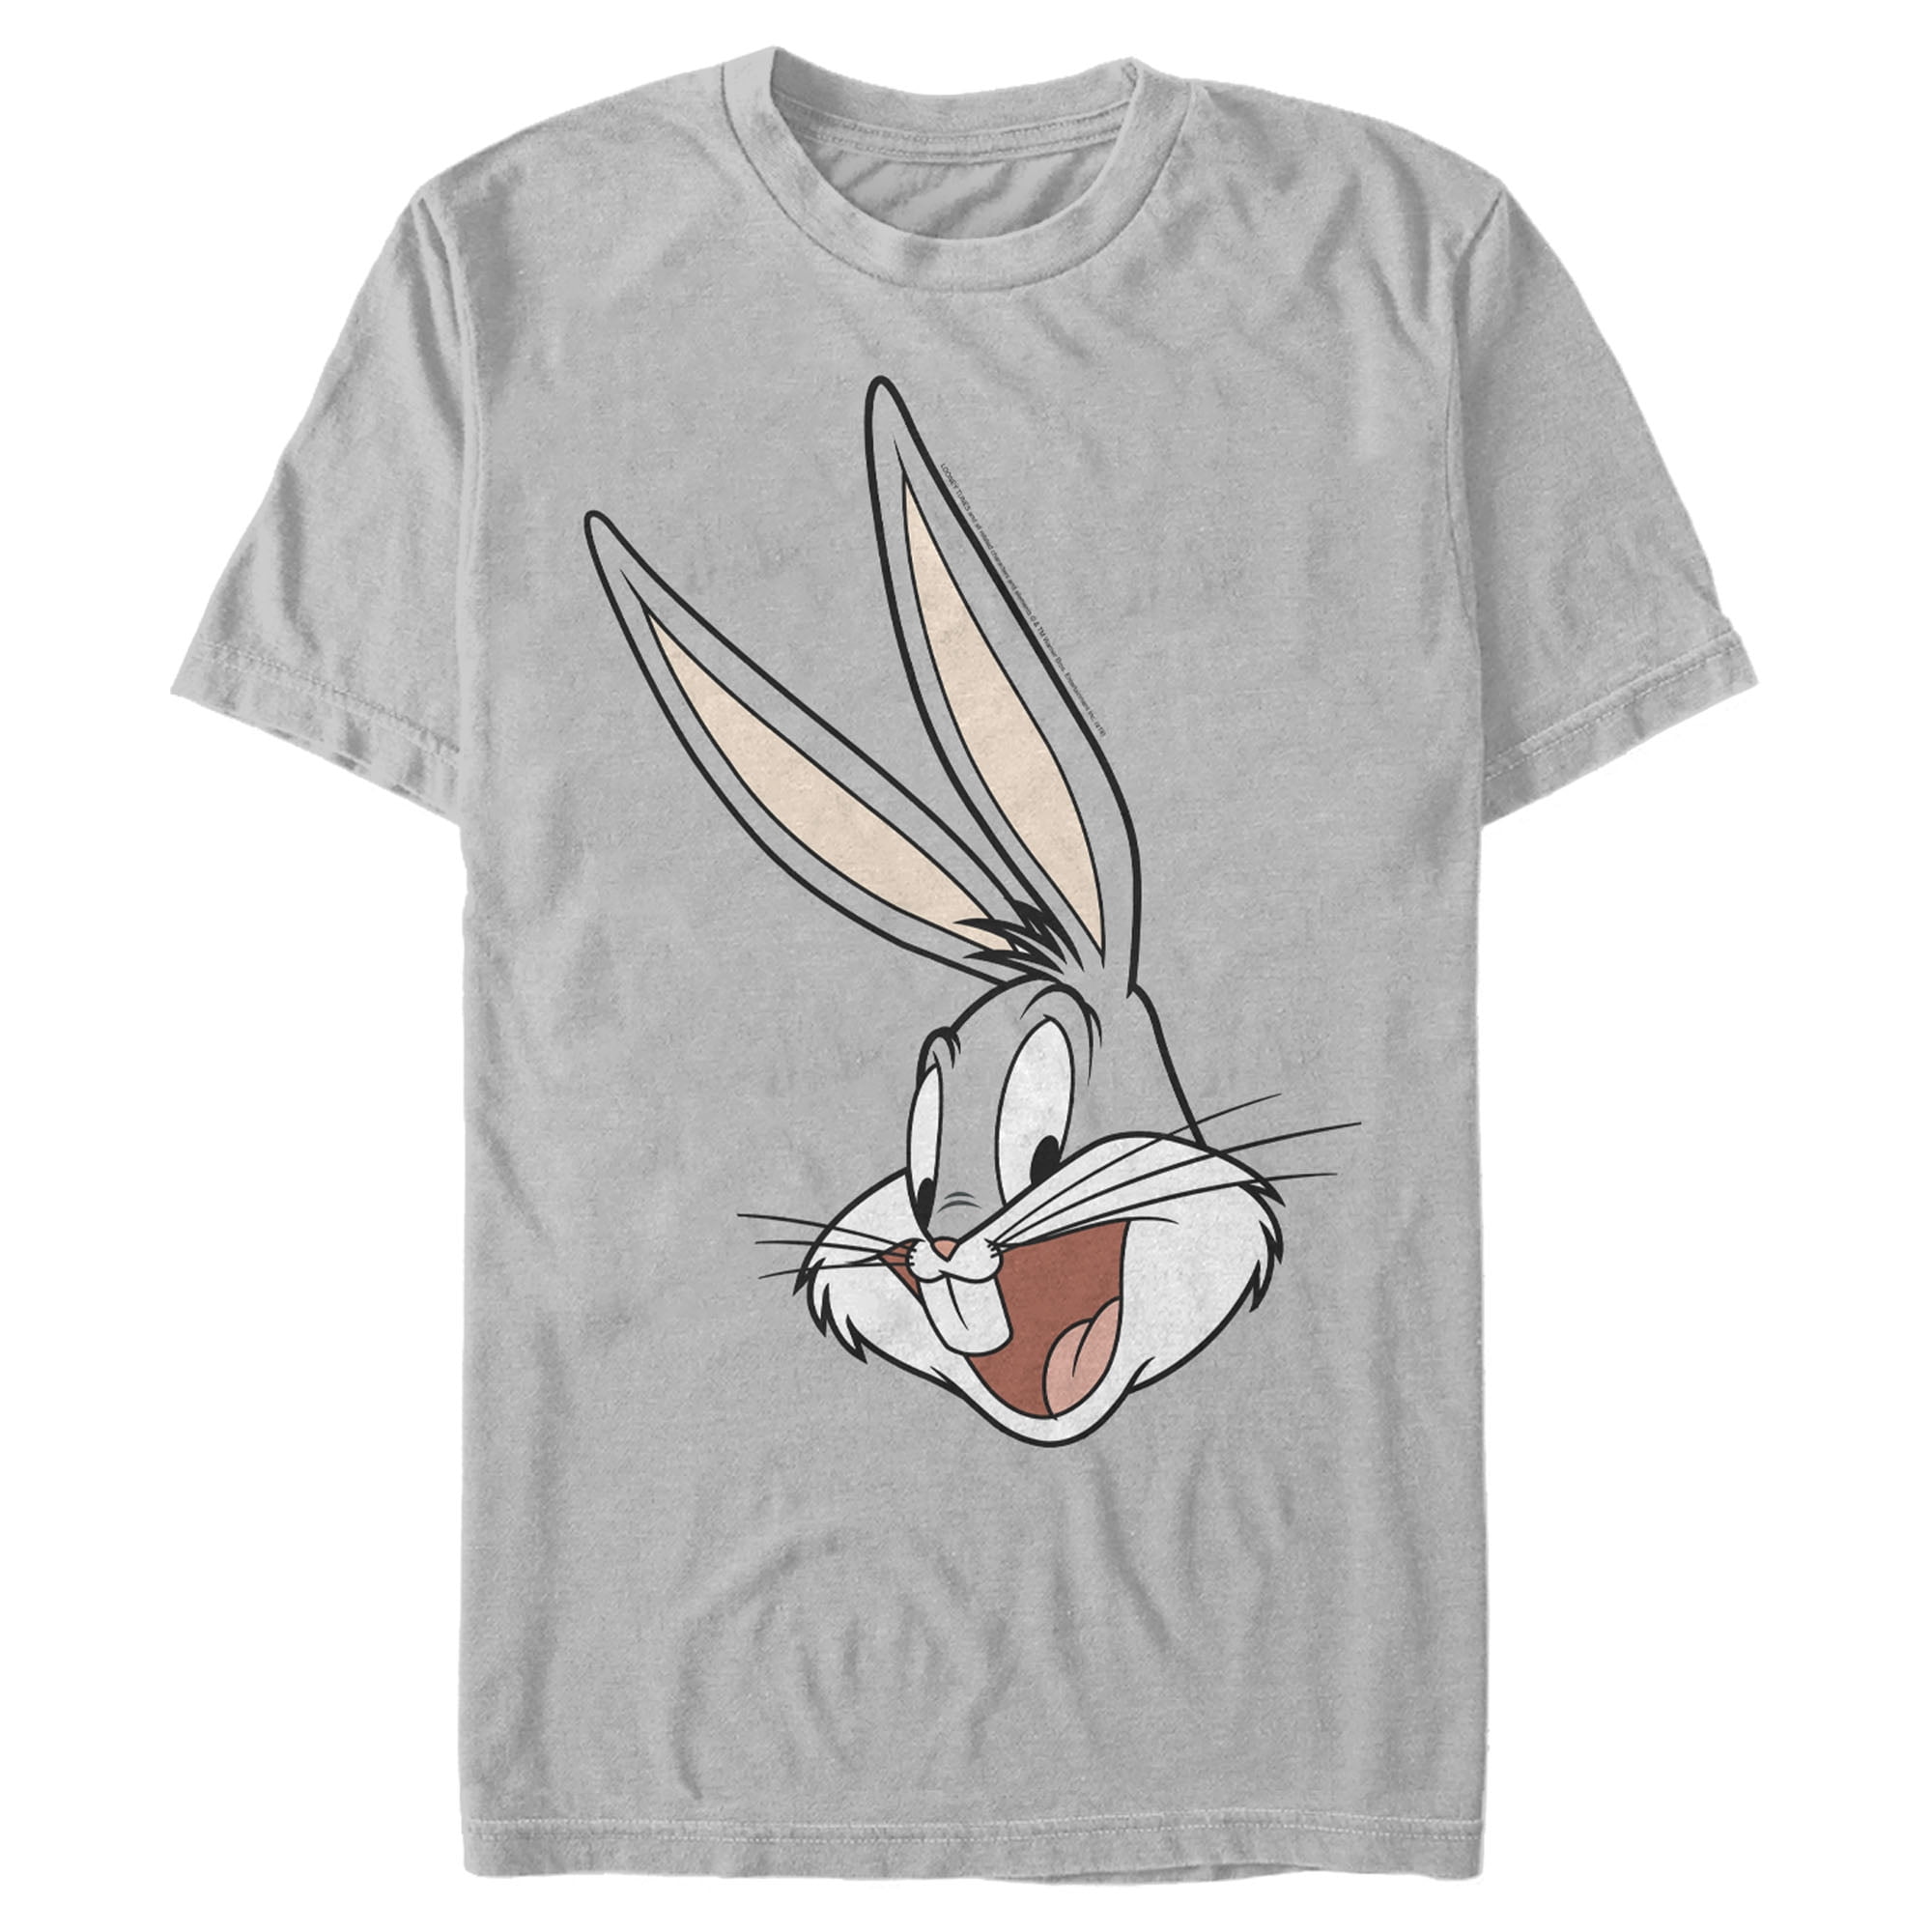 Men's Looney Tunes Bugs Bunny Classic Portrait Graphic Tee Silver 2X Large